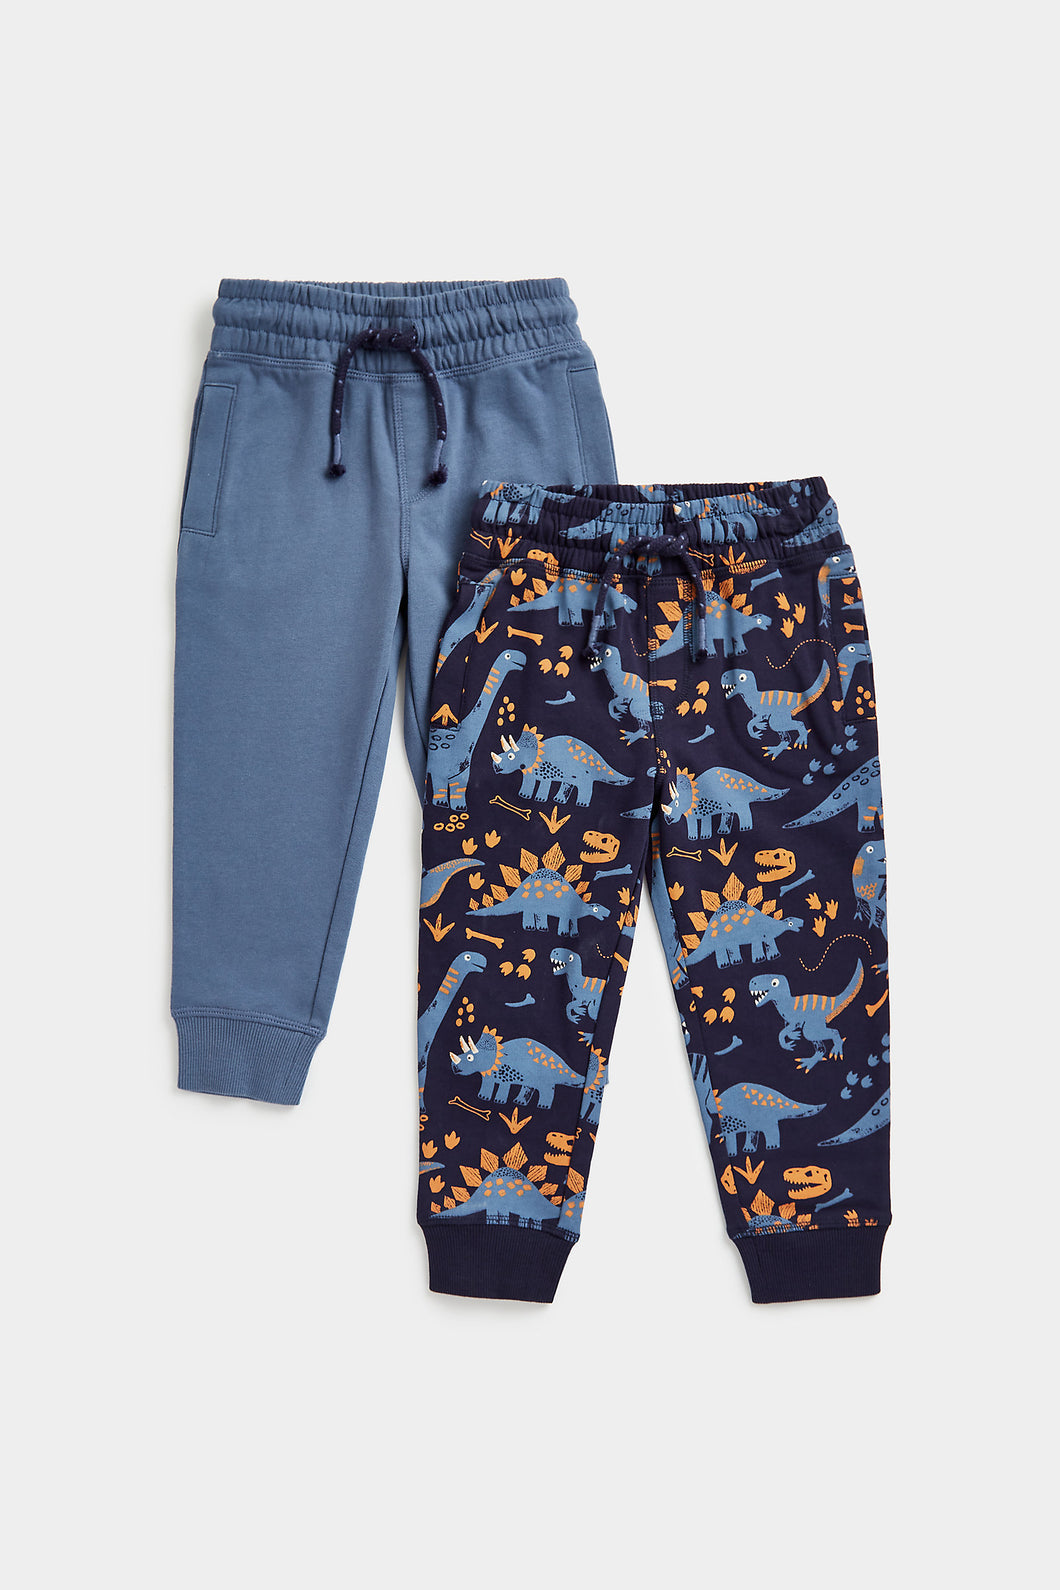 Mothercare Dino Club Joggers - 2 Pack